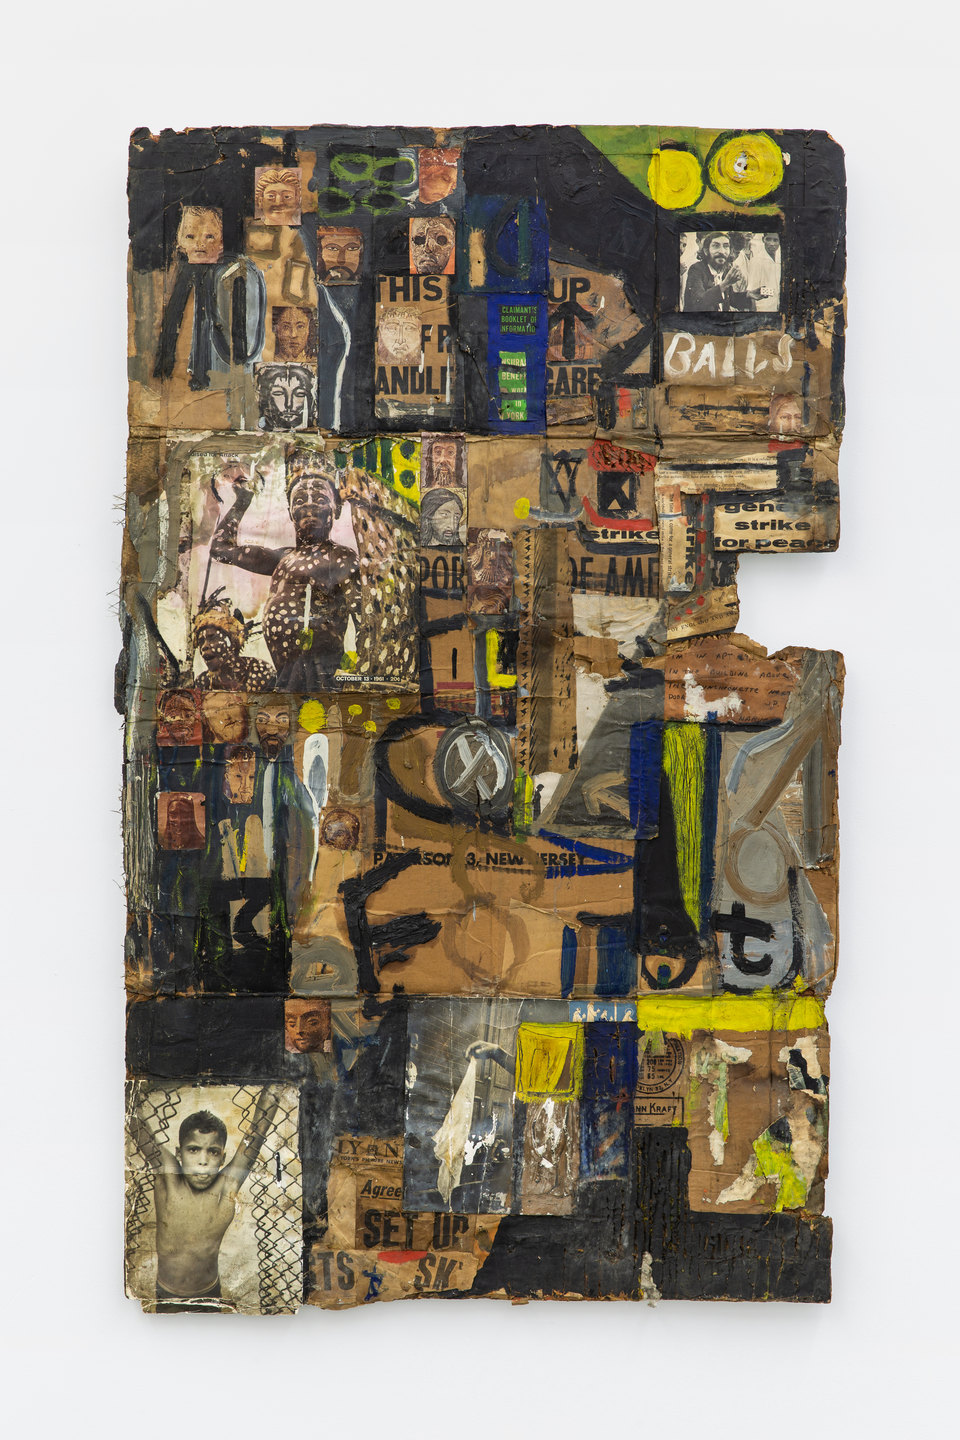 Richard Tyler, 'Untitled', c. 1962, Assemblage: magazine, pictures, newspaper, fabric, oil paint on cardboard box, 122 x 74 x 5cm, Shit and Doom - NO!art, 2019, Cell Project Space